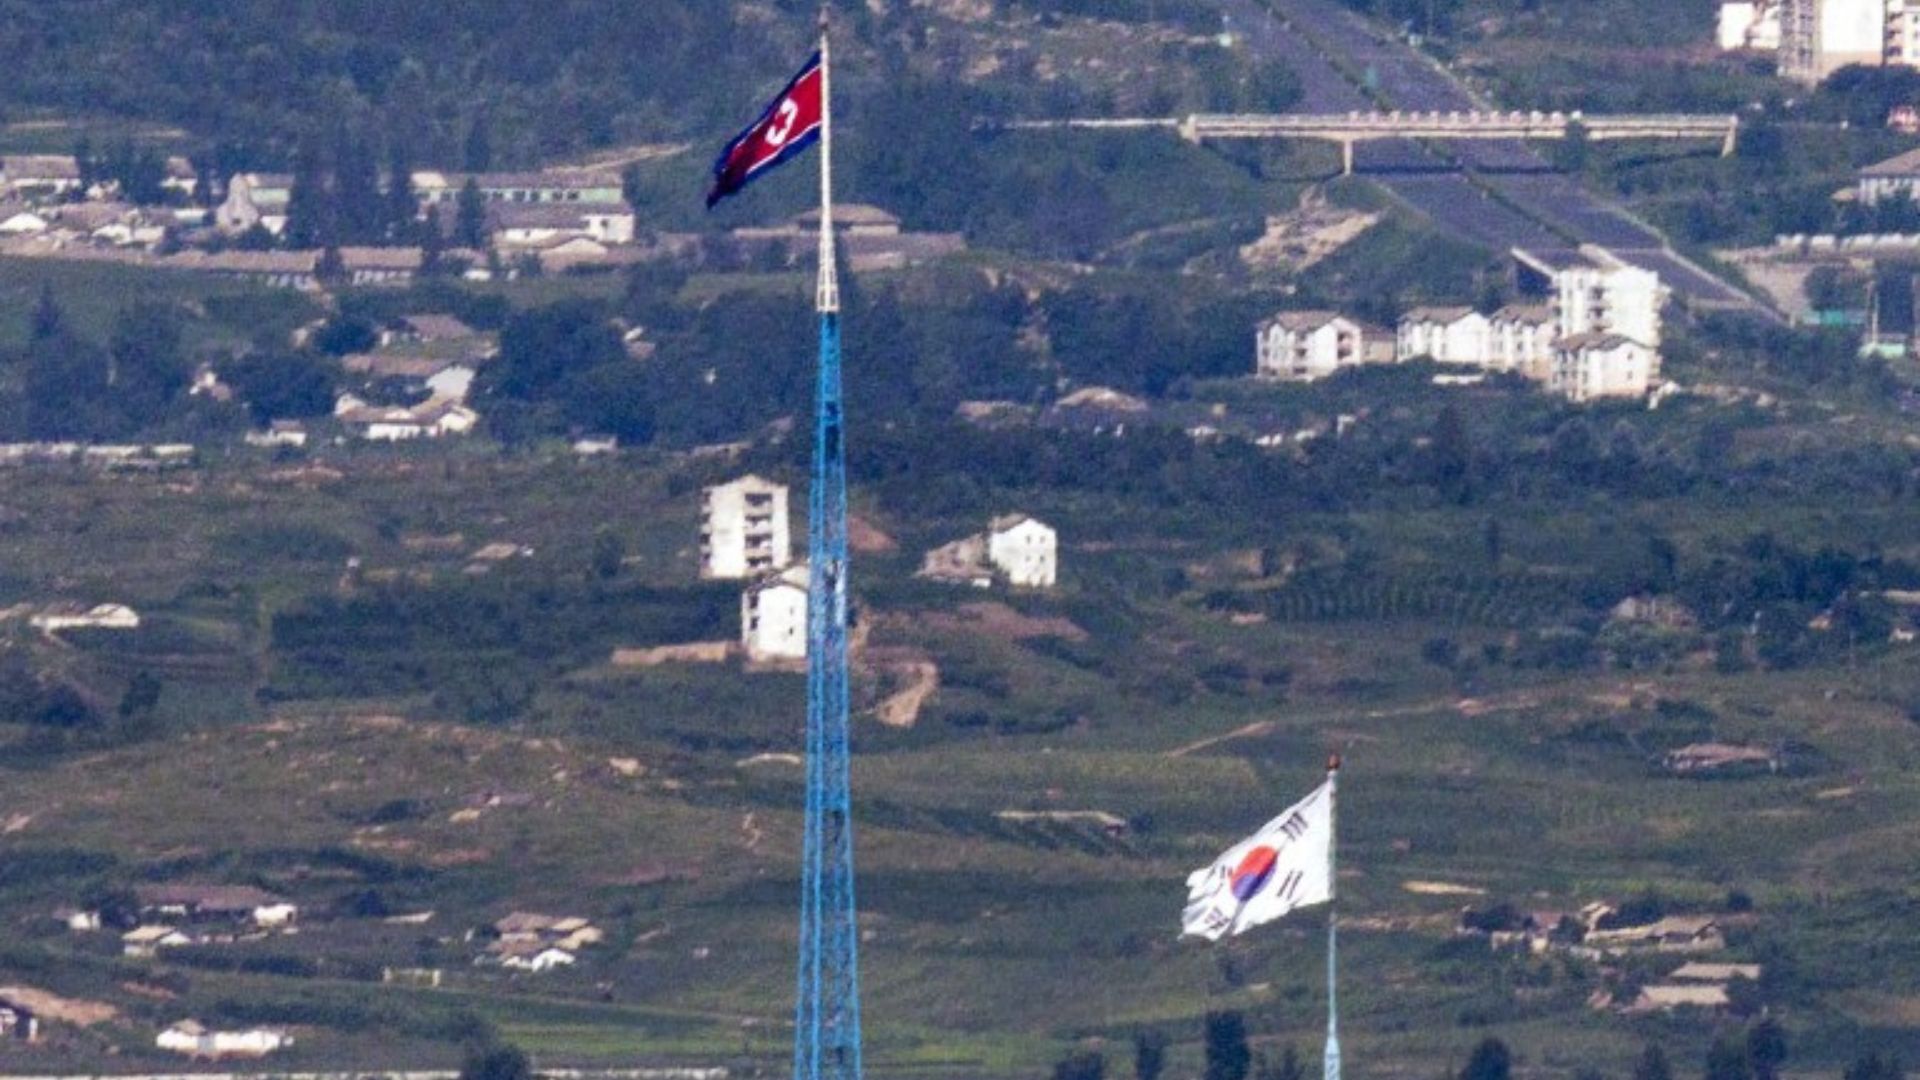 South Korea Fires Warning Shots As North Korean Troops Breach Demilitarized Zone